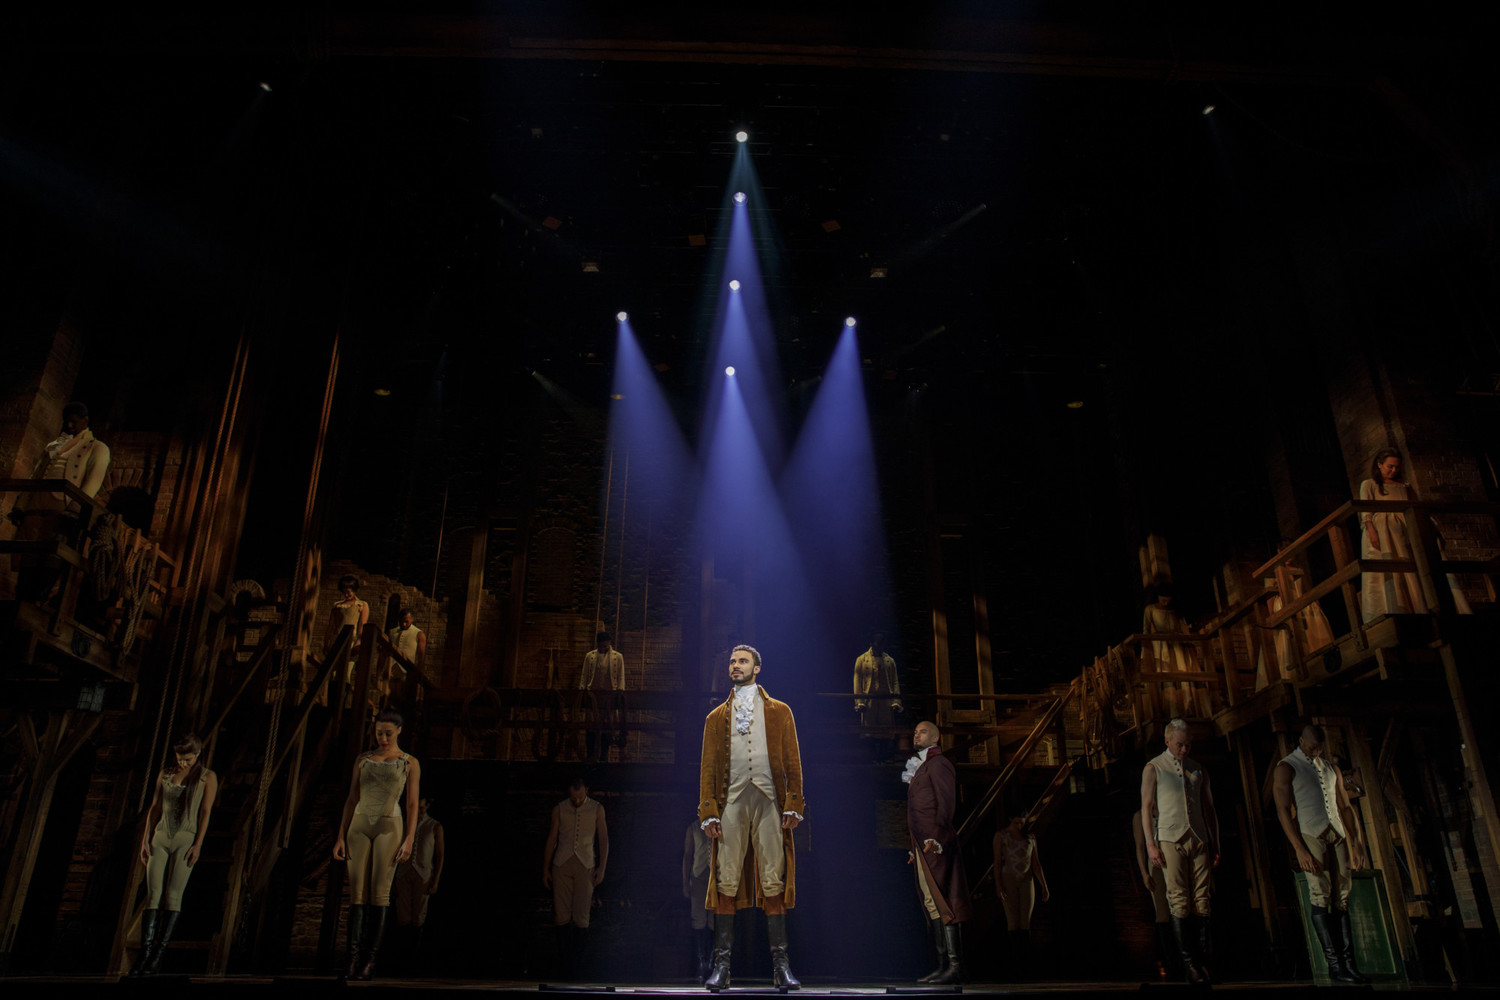 BWW Review: HAMILTON at Wharton Center For The Performing Arts Delivers an Expectation-Smashing Performance 